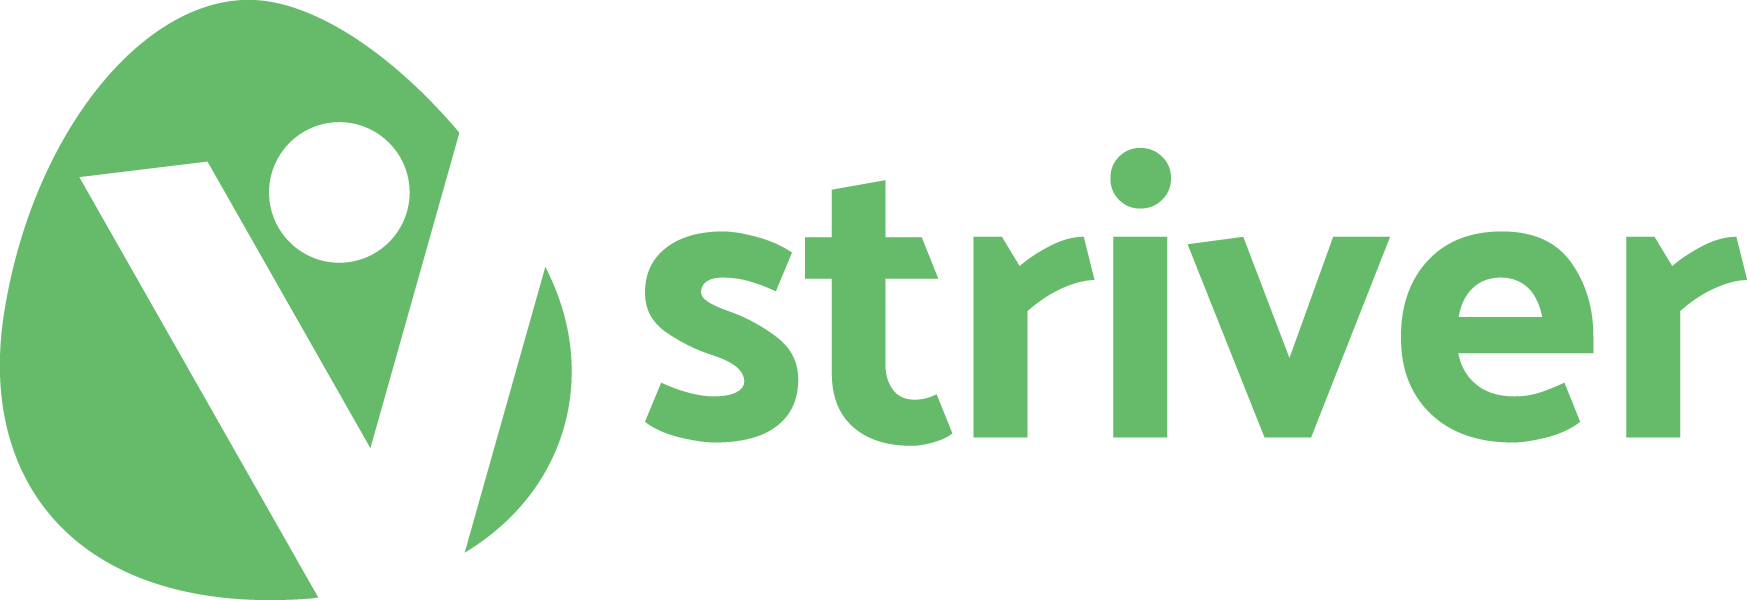 The Striver logo by 2Simple Ltd